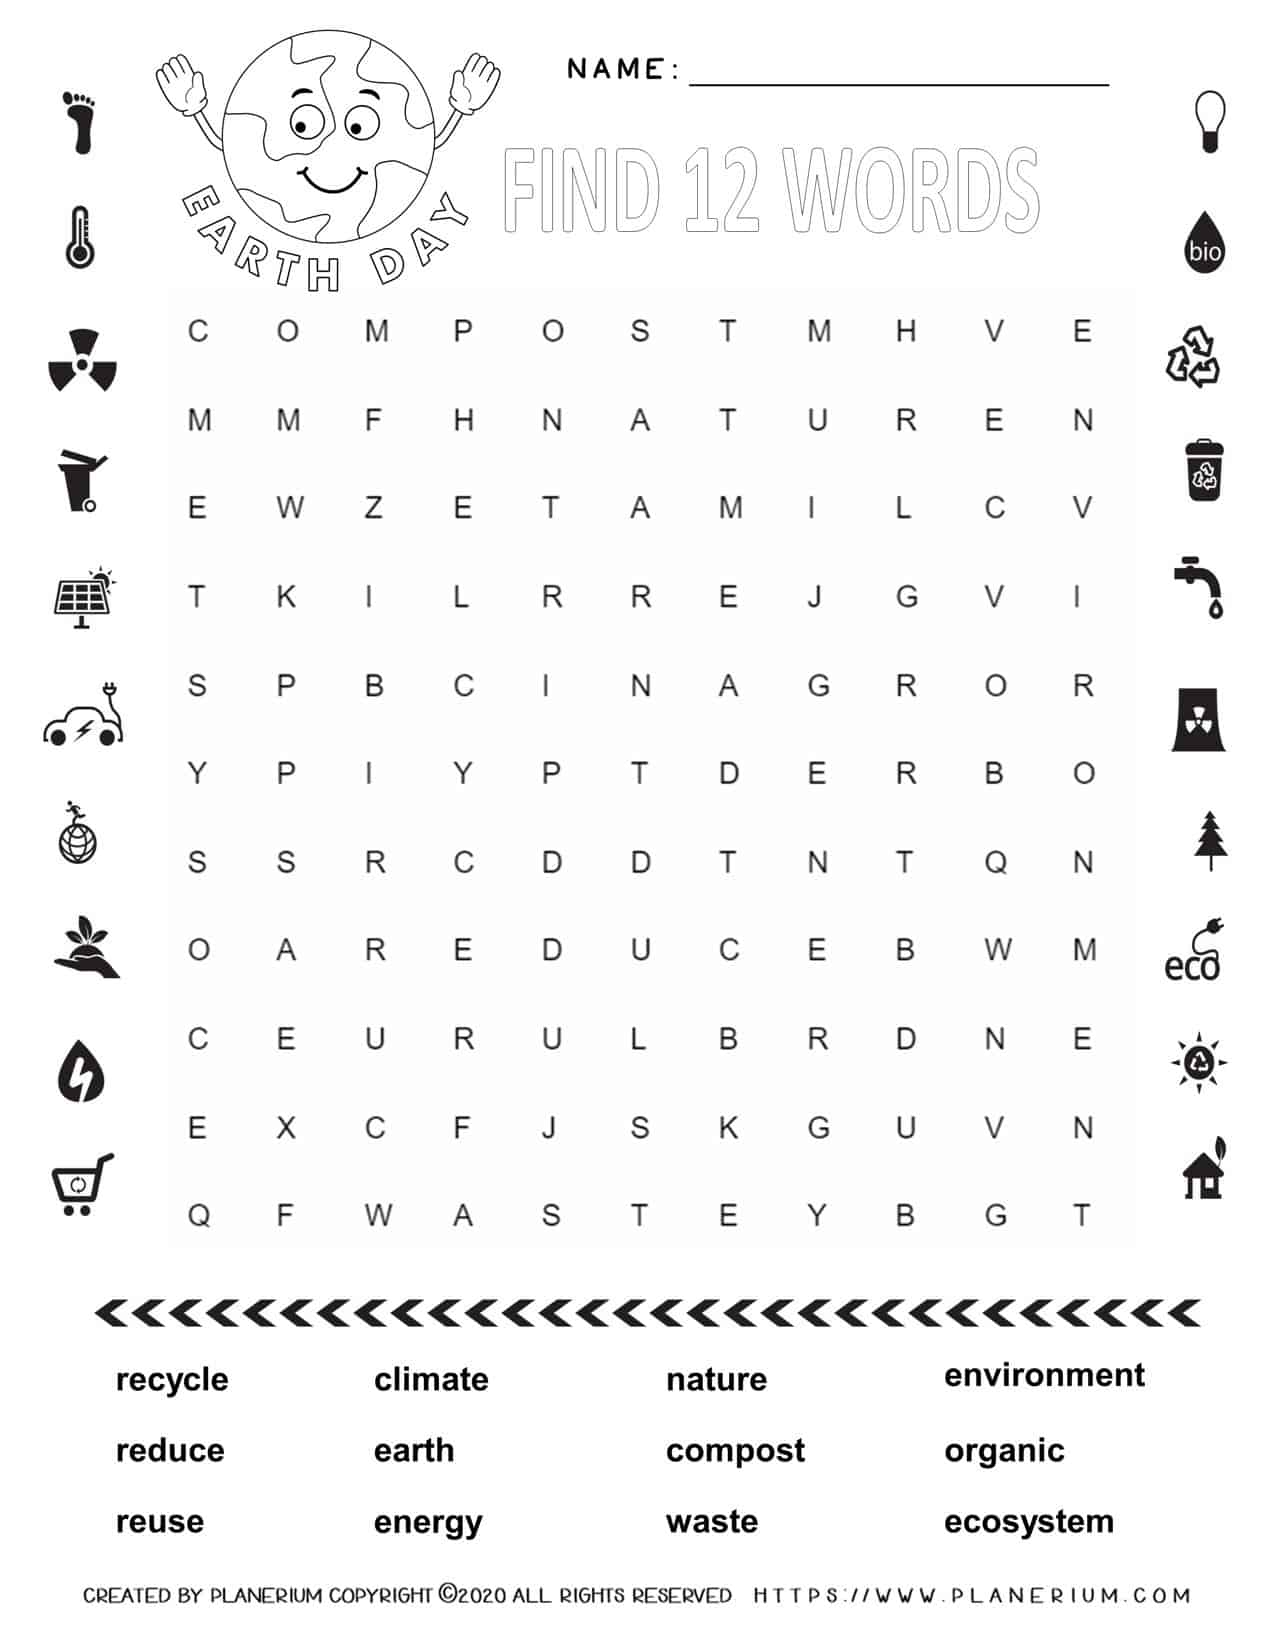 Earth Day Word Search Puzzle with Twelve Words - Eco-Friendly Vocabulary Activity for Kids